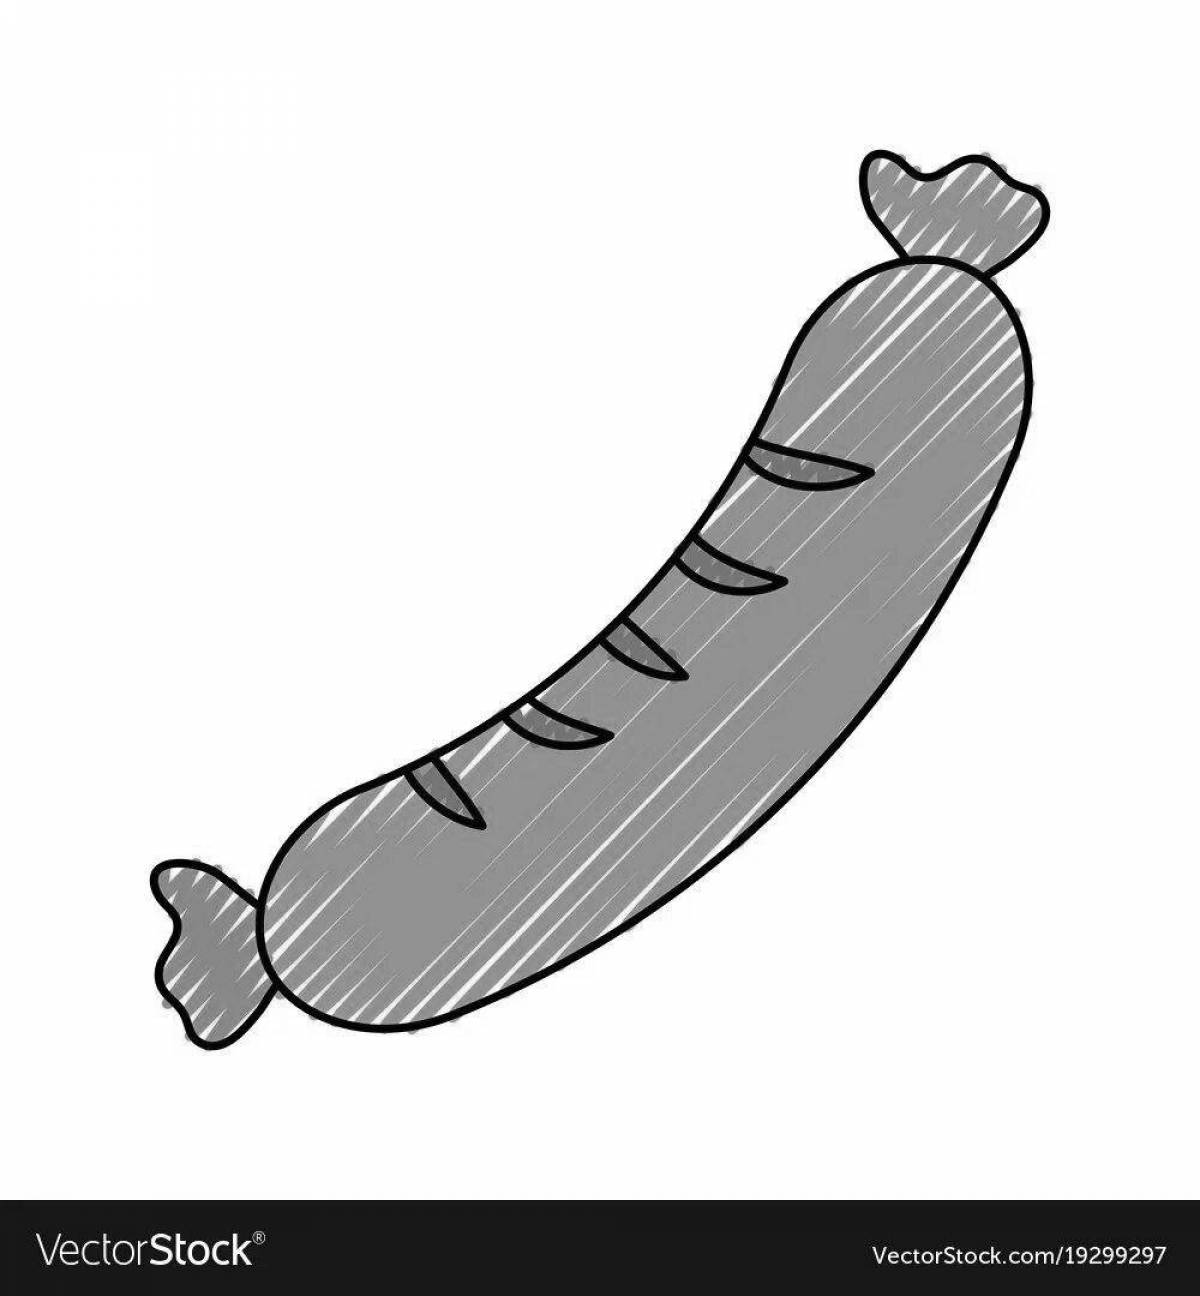 A fun sausage coloring book for kids